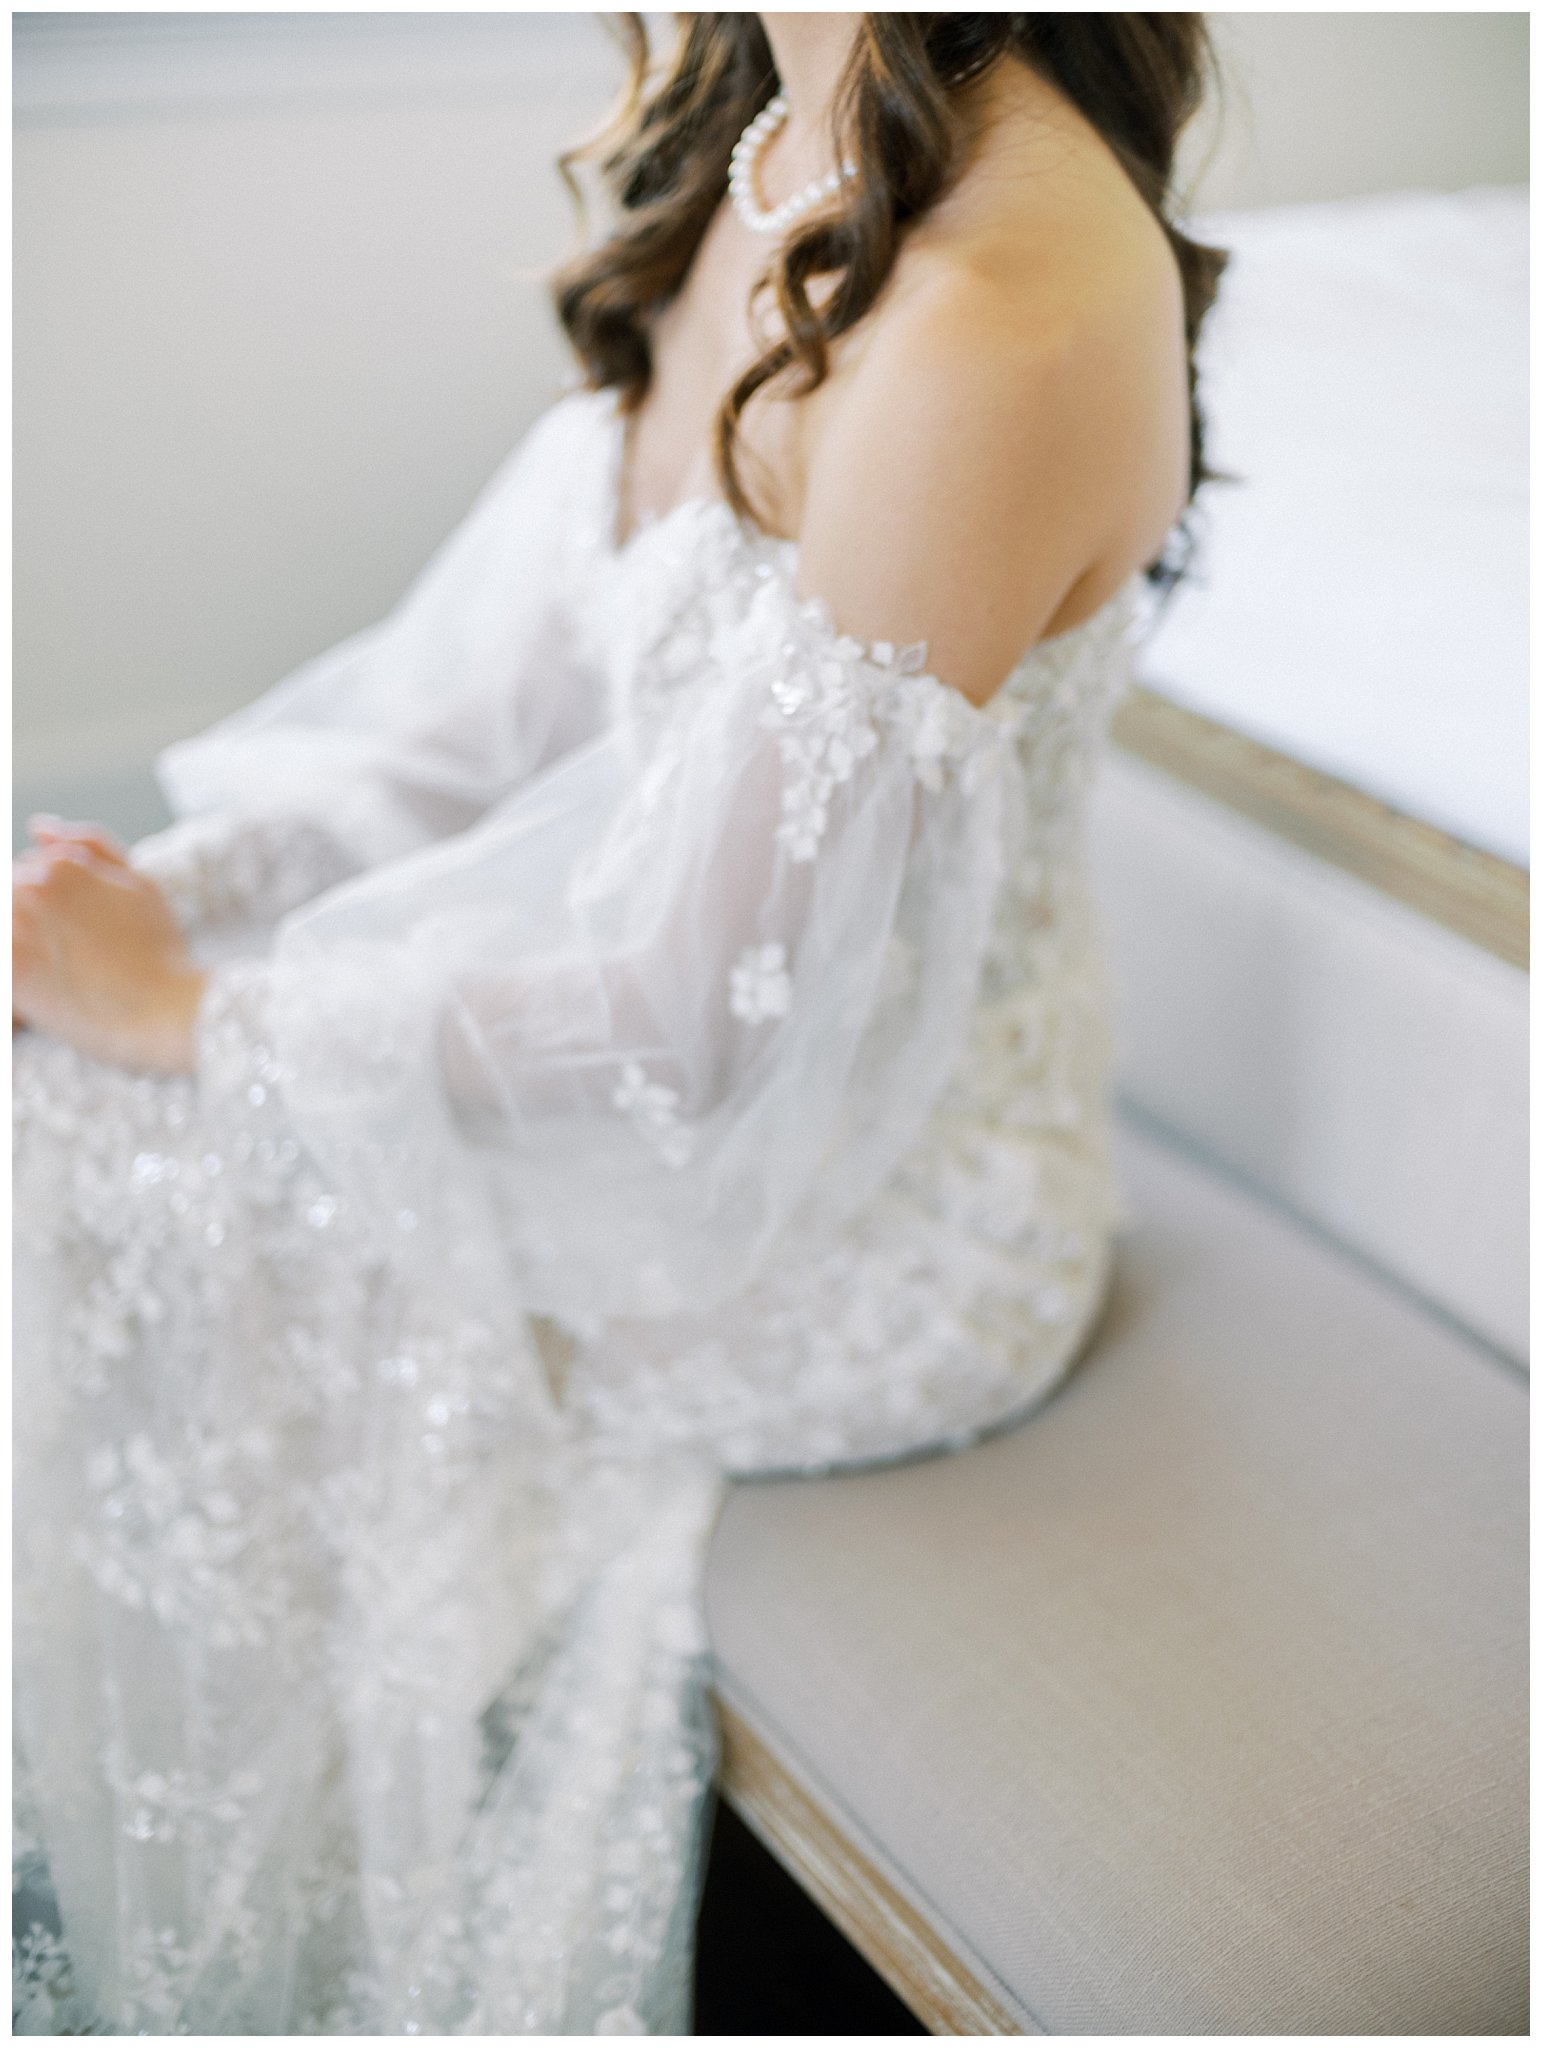 A bride wearing a classic long, sleeved wedding gown during her TERRA wedding in Paso Robles, California.